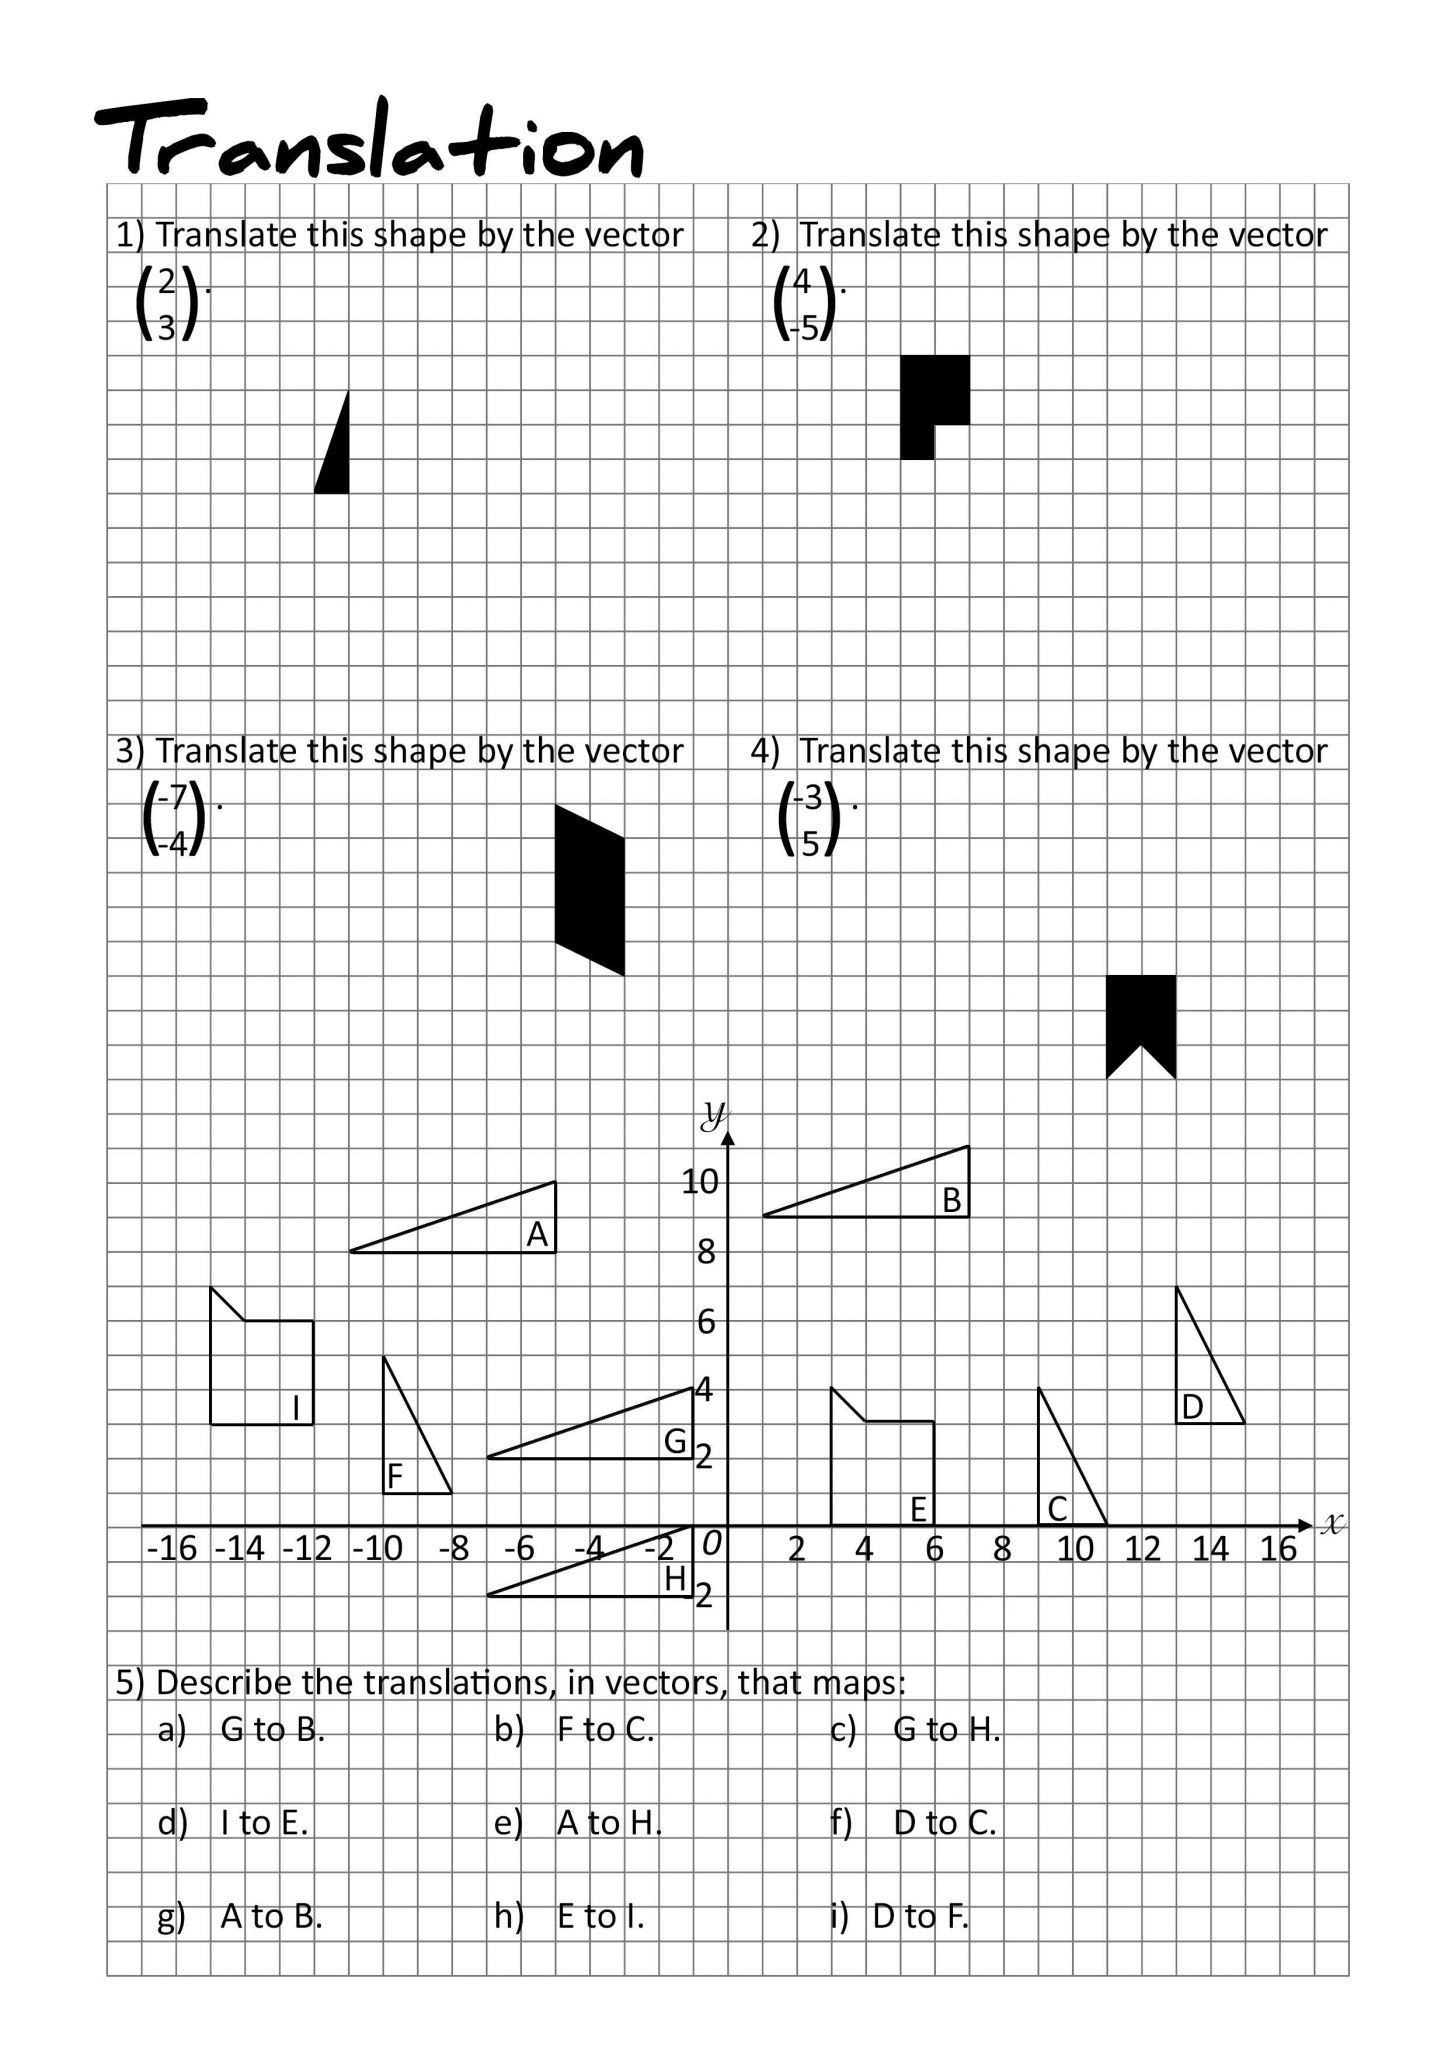 Translation Rotation Reflection Worksheet Answers as Well as Translating Shapes Worksheet Year 6 Image Collections Worksheet